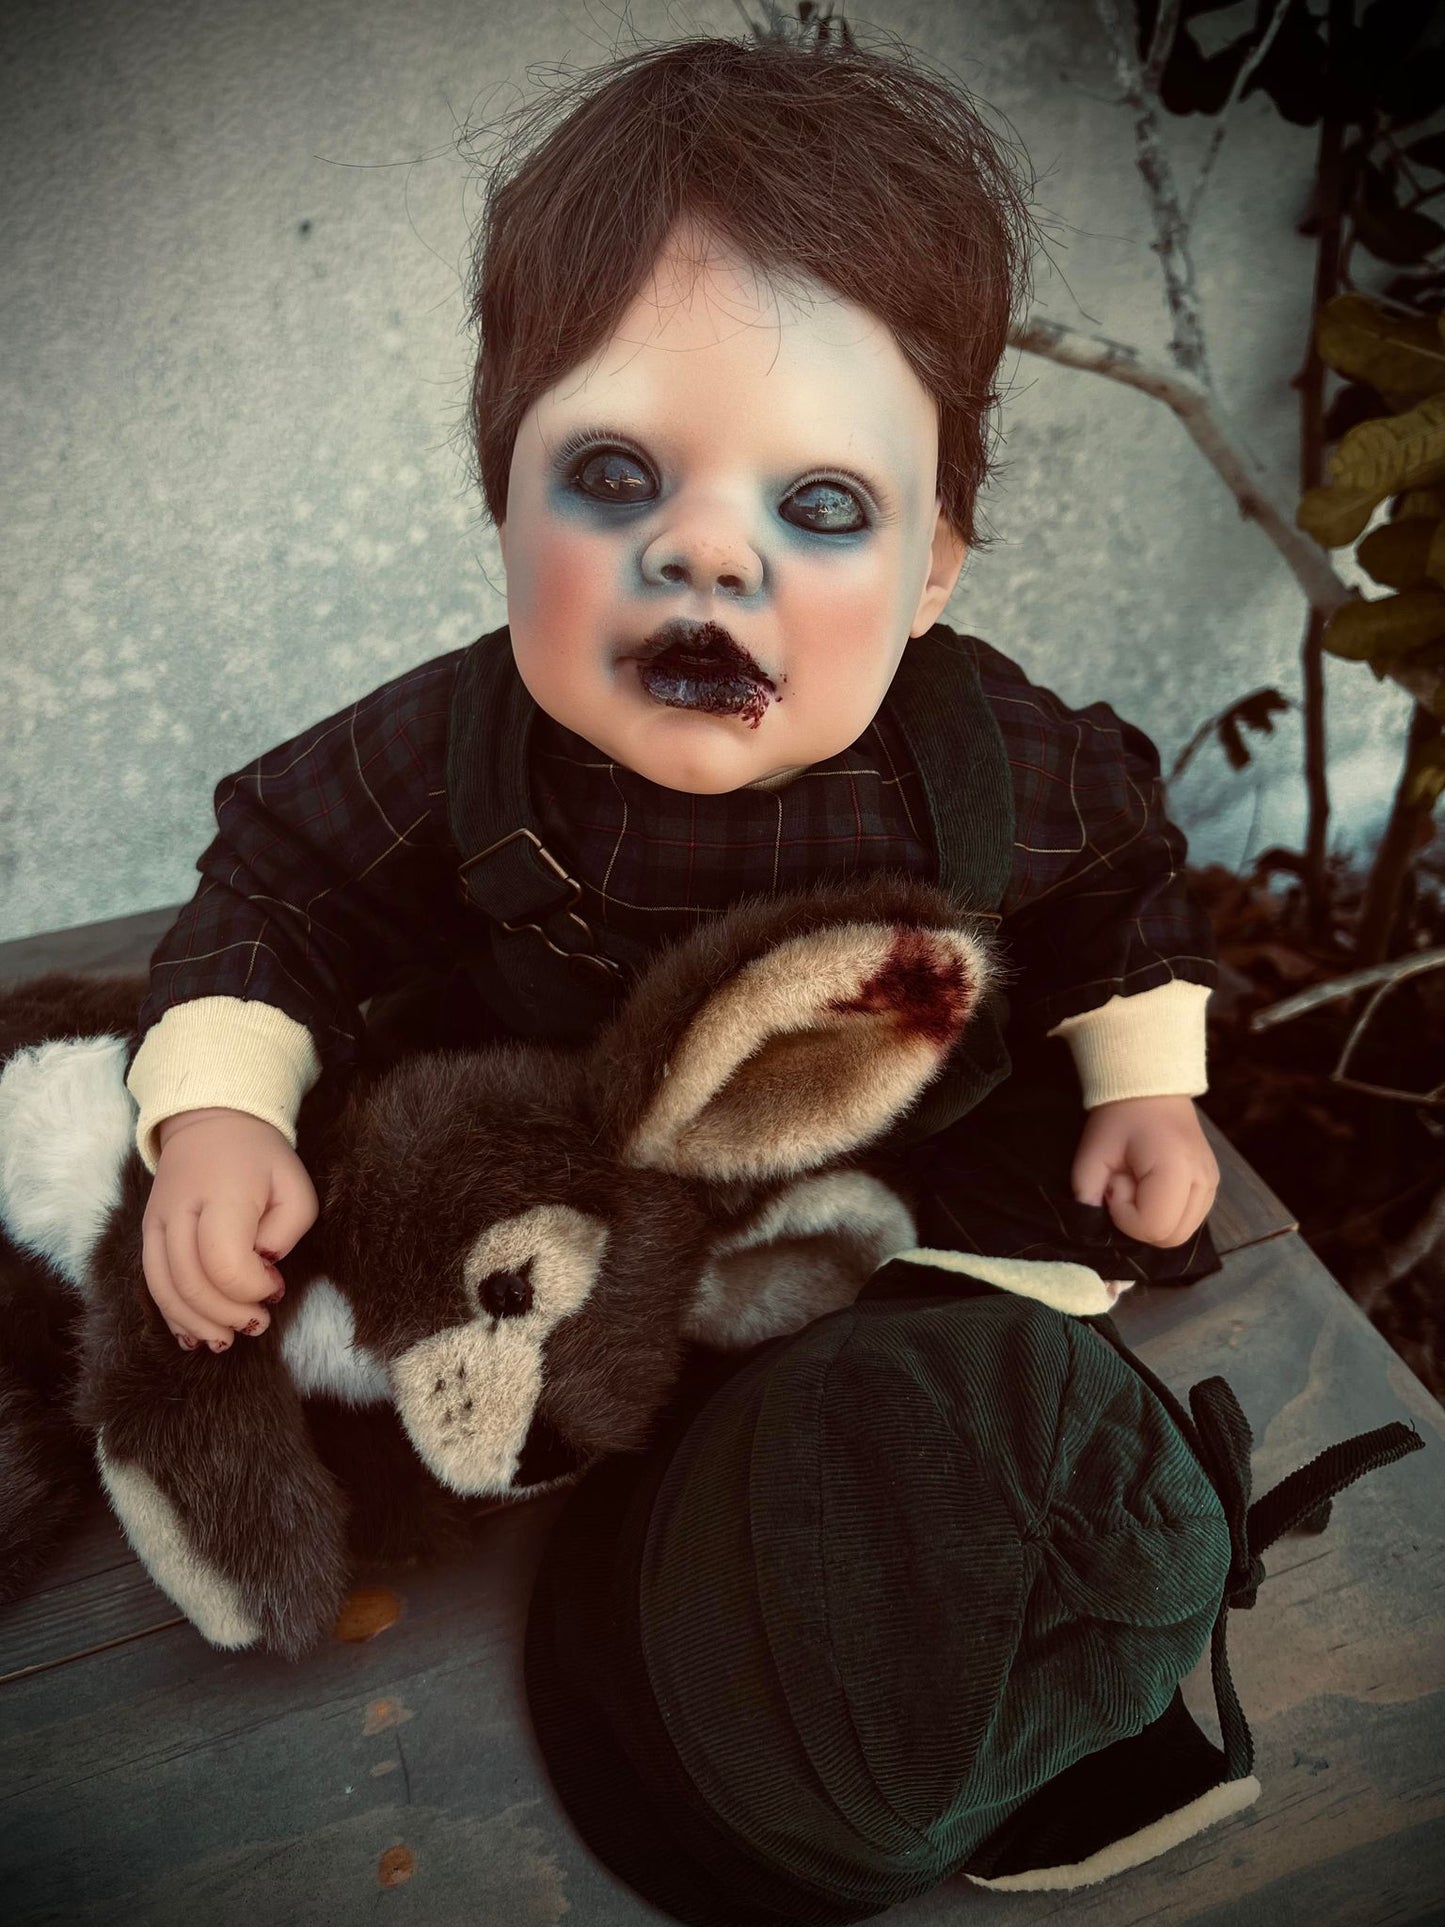 Meet Emery 22" Vinyl Reborn Doll Witchy Creepy Haunted Spirit Infected Scary Spooky Zombie Possessed Positive Energy Oddity Gift Idea Vessel